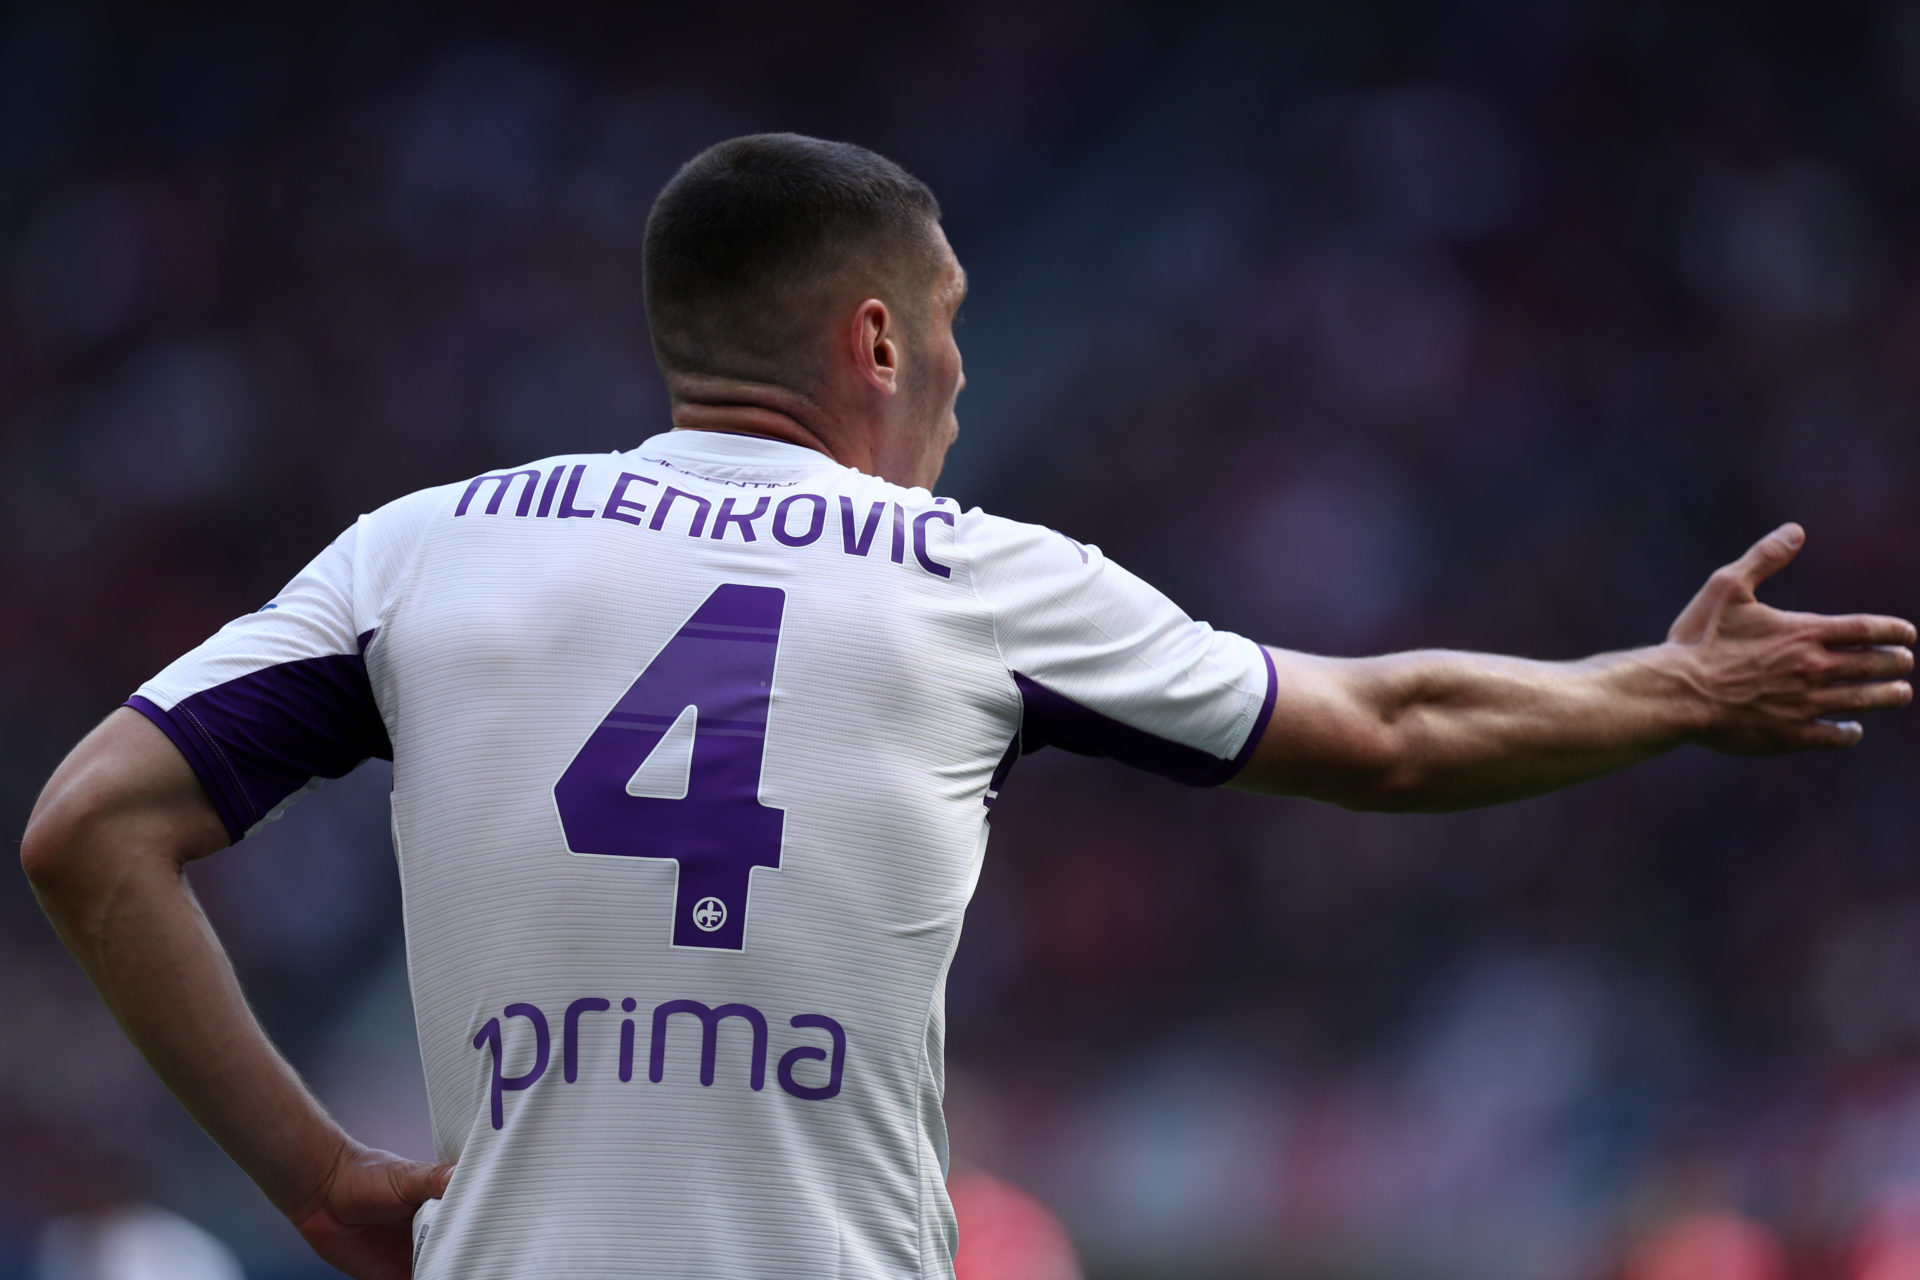 West Ham reportedly want to sign Fiorentina centre-back Nikola Milenkovic in the summer